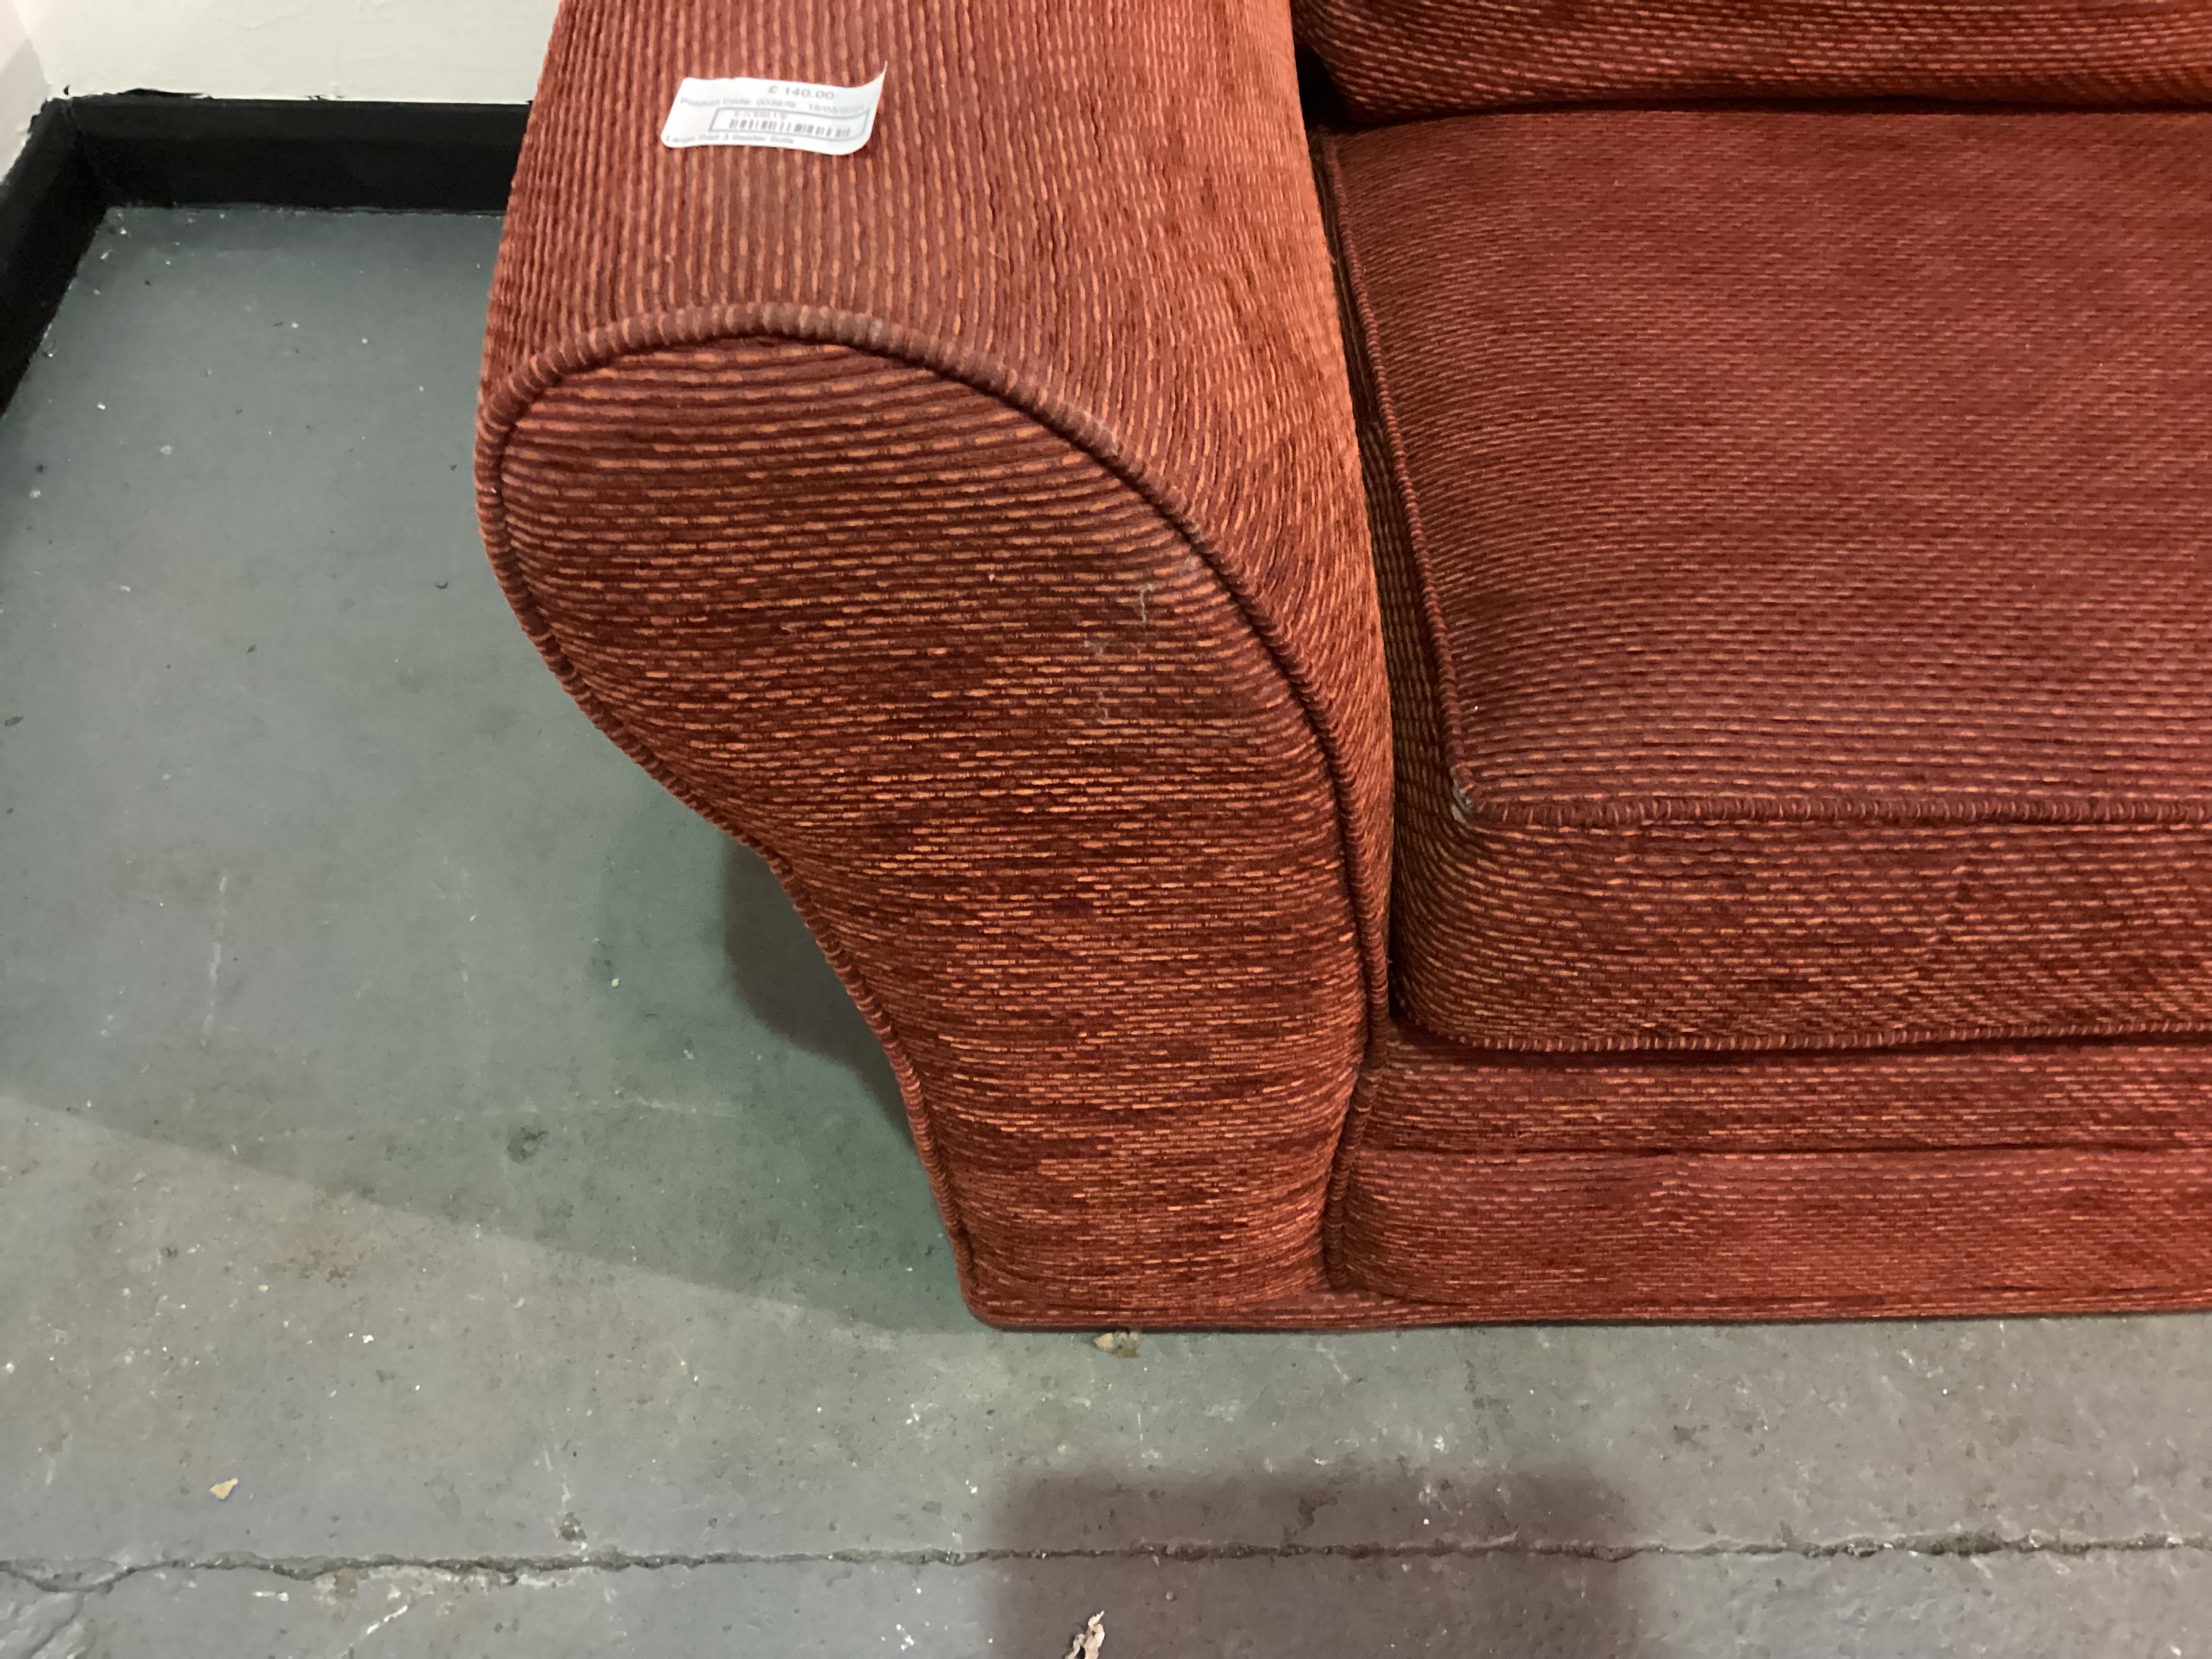 Large Red 3 Seater Fabric Sofa 